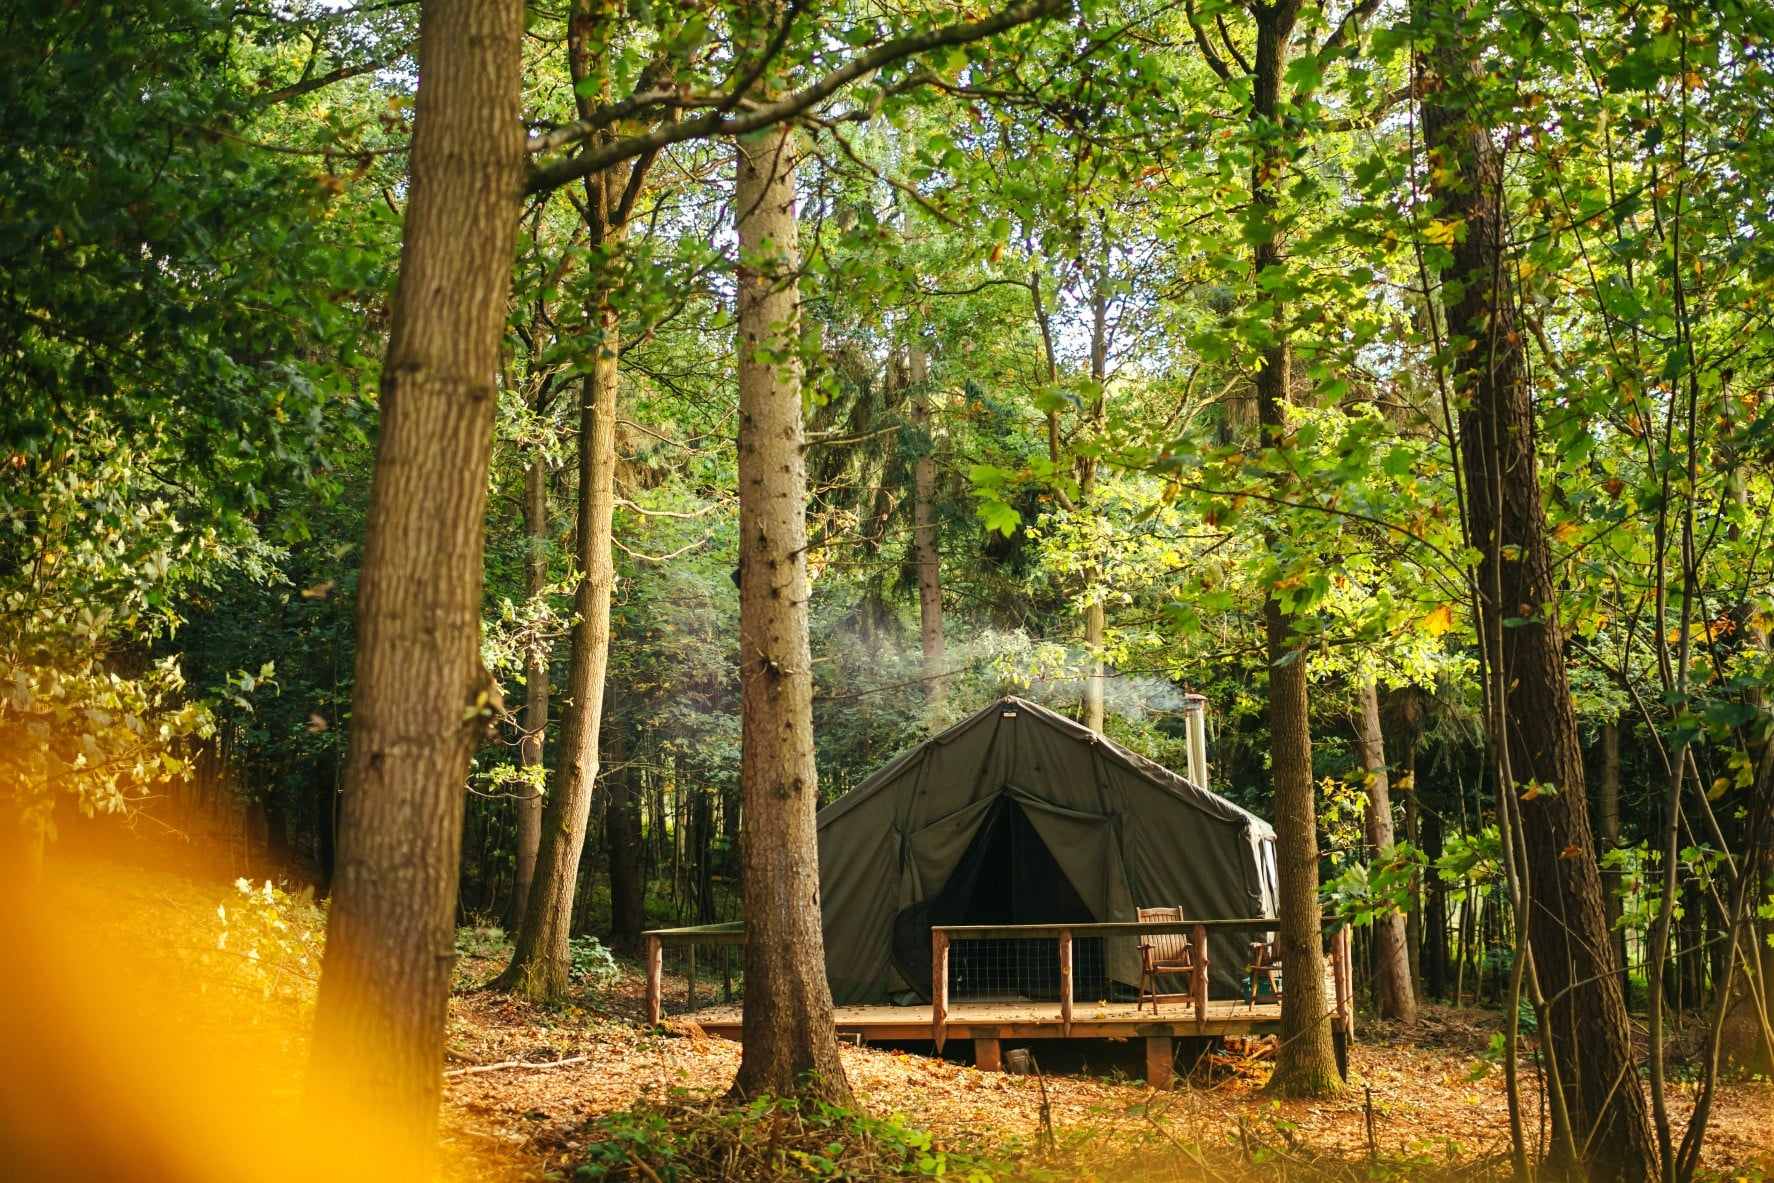 green-officers-hideaway-safari-tent-on-decking-in-forest-on-sunny-day-glamping-herefordshire